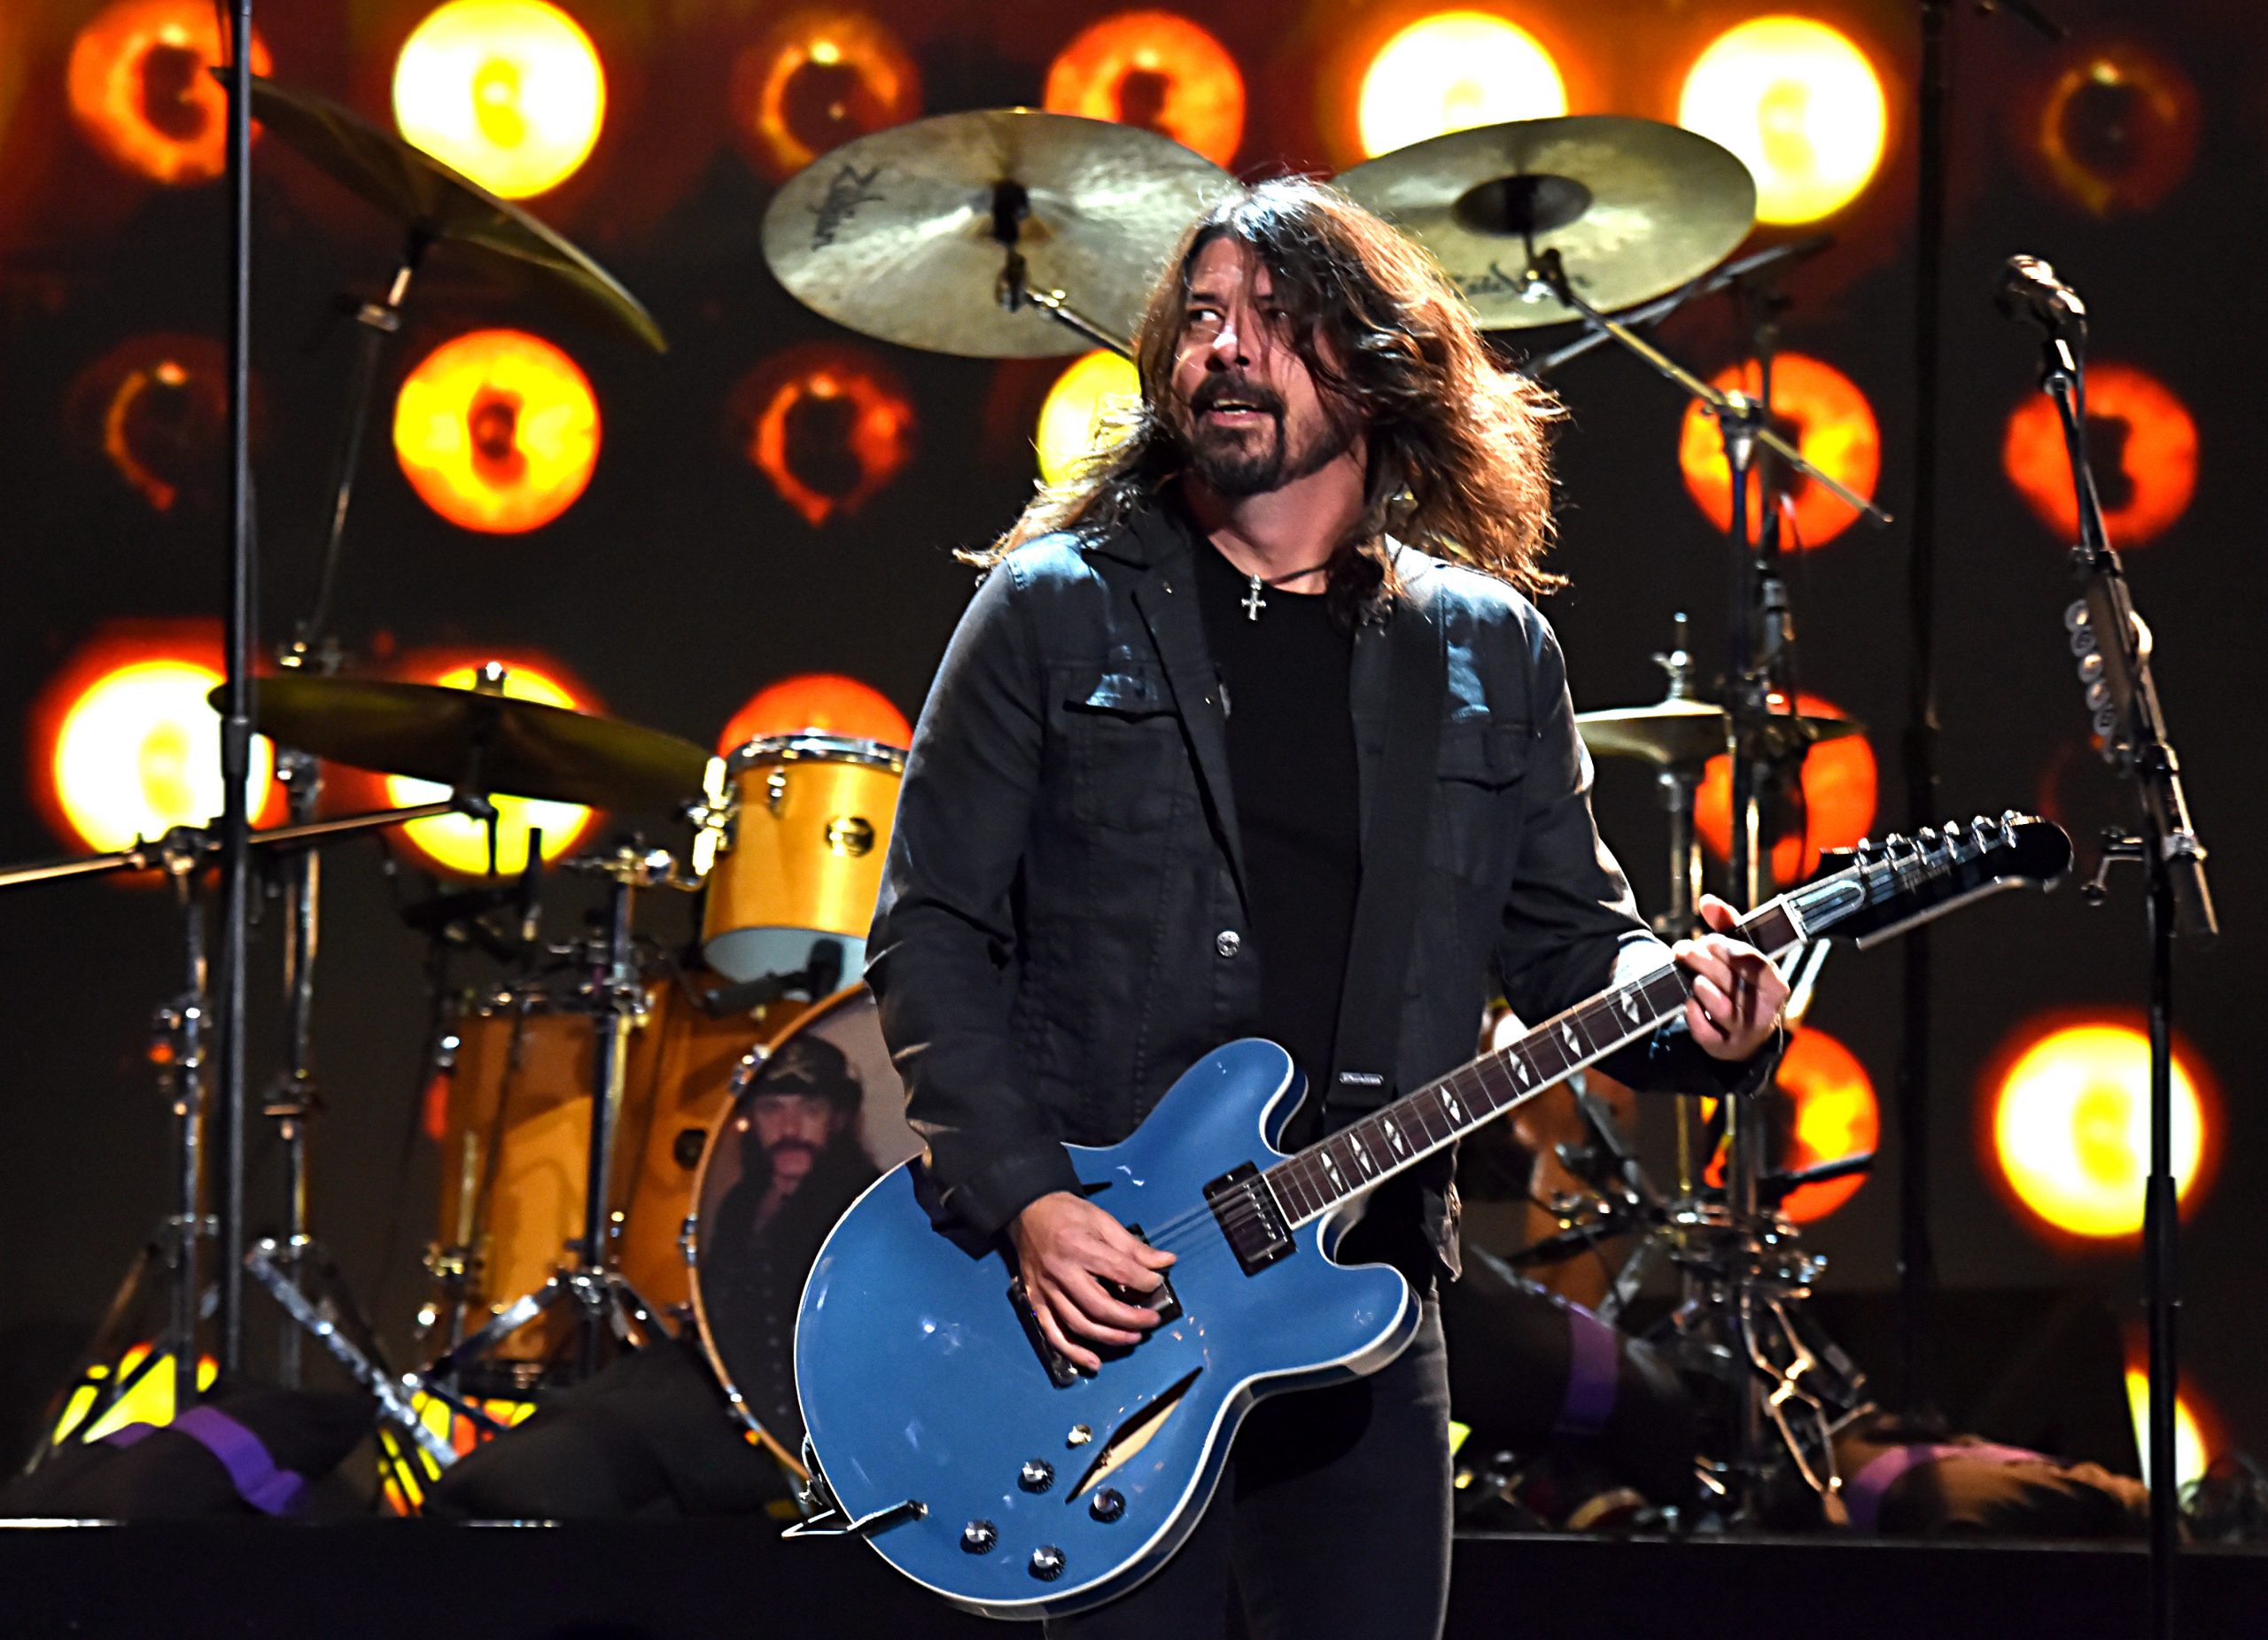 Dave GROHL